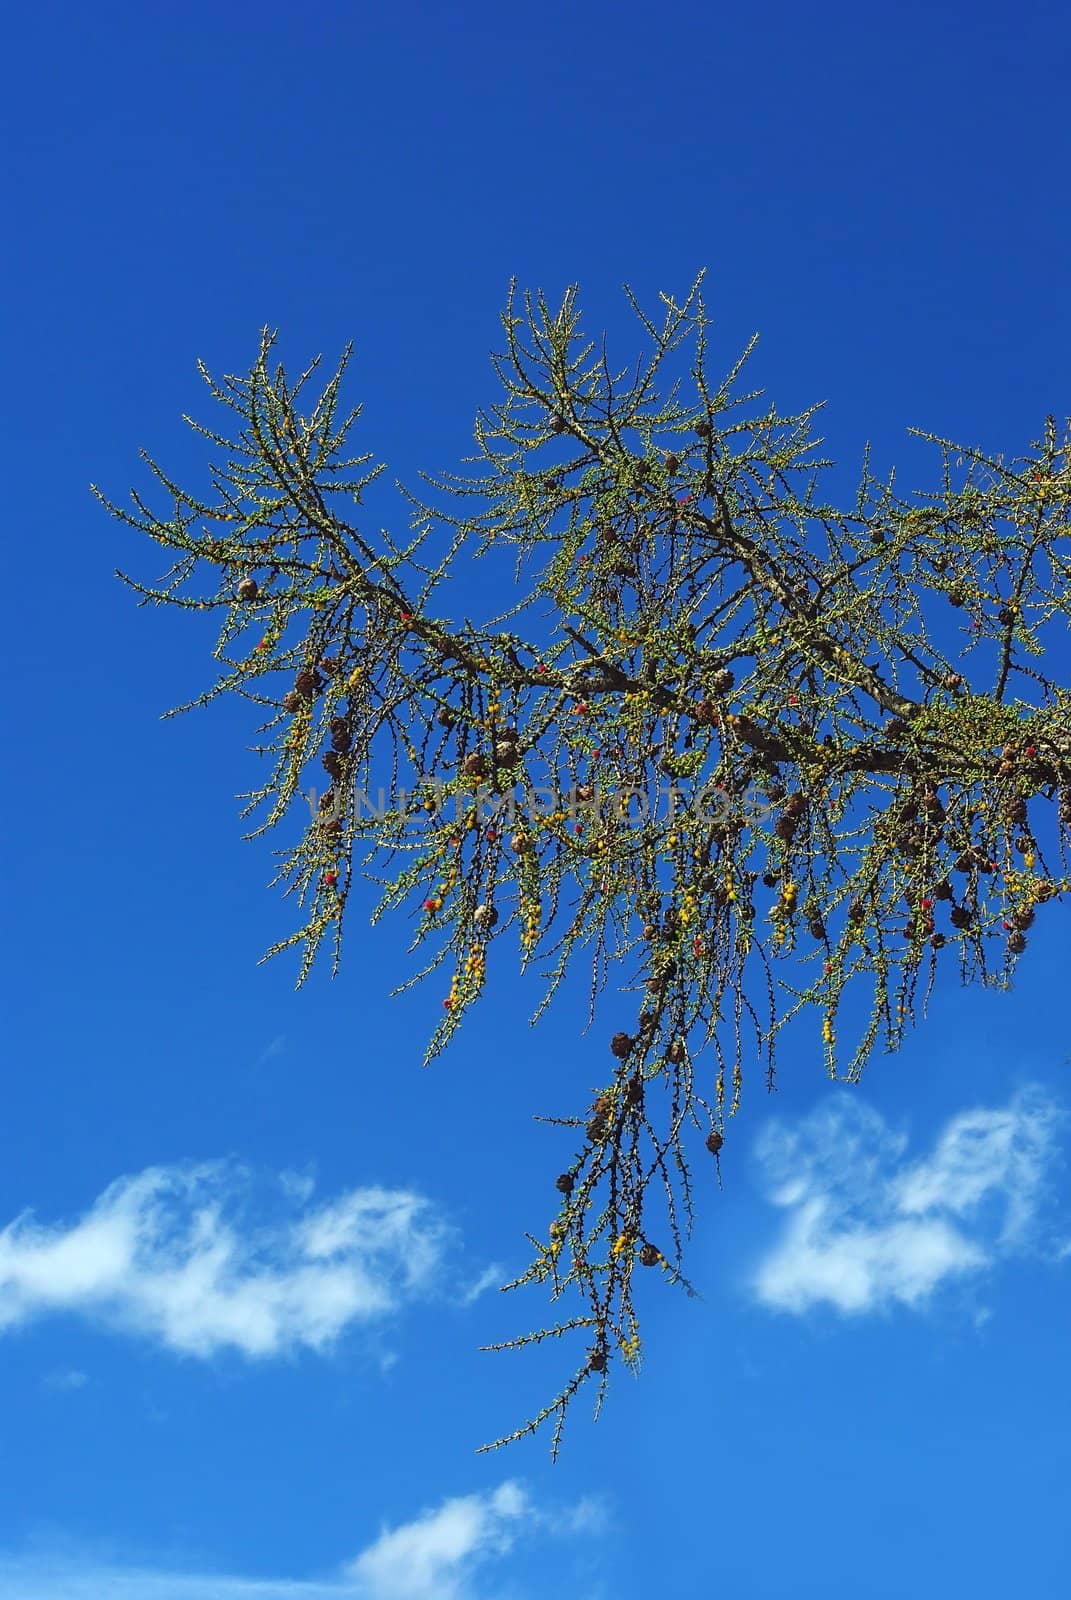 Larch Cone on a branch against the blue sky by Vitamin